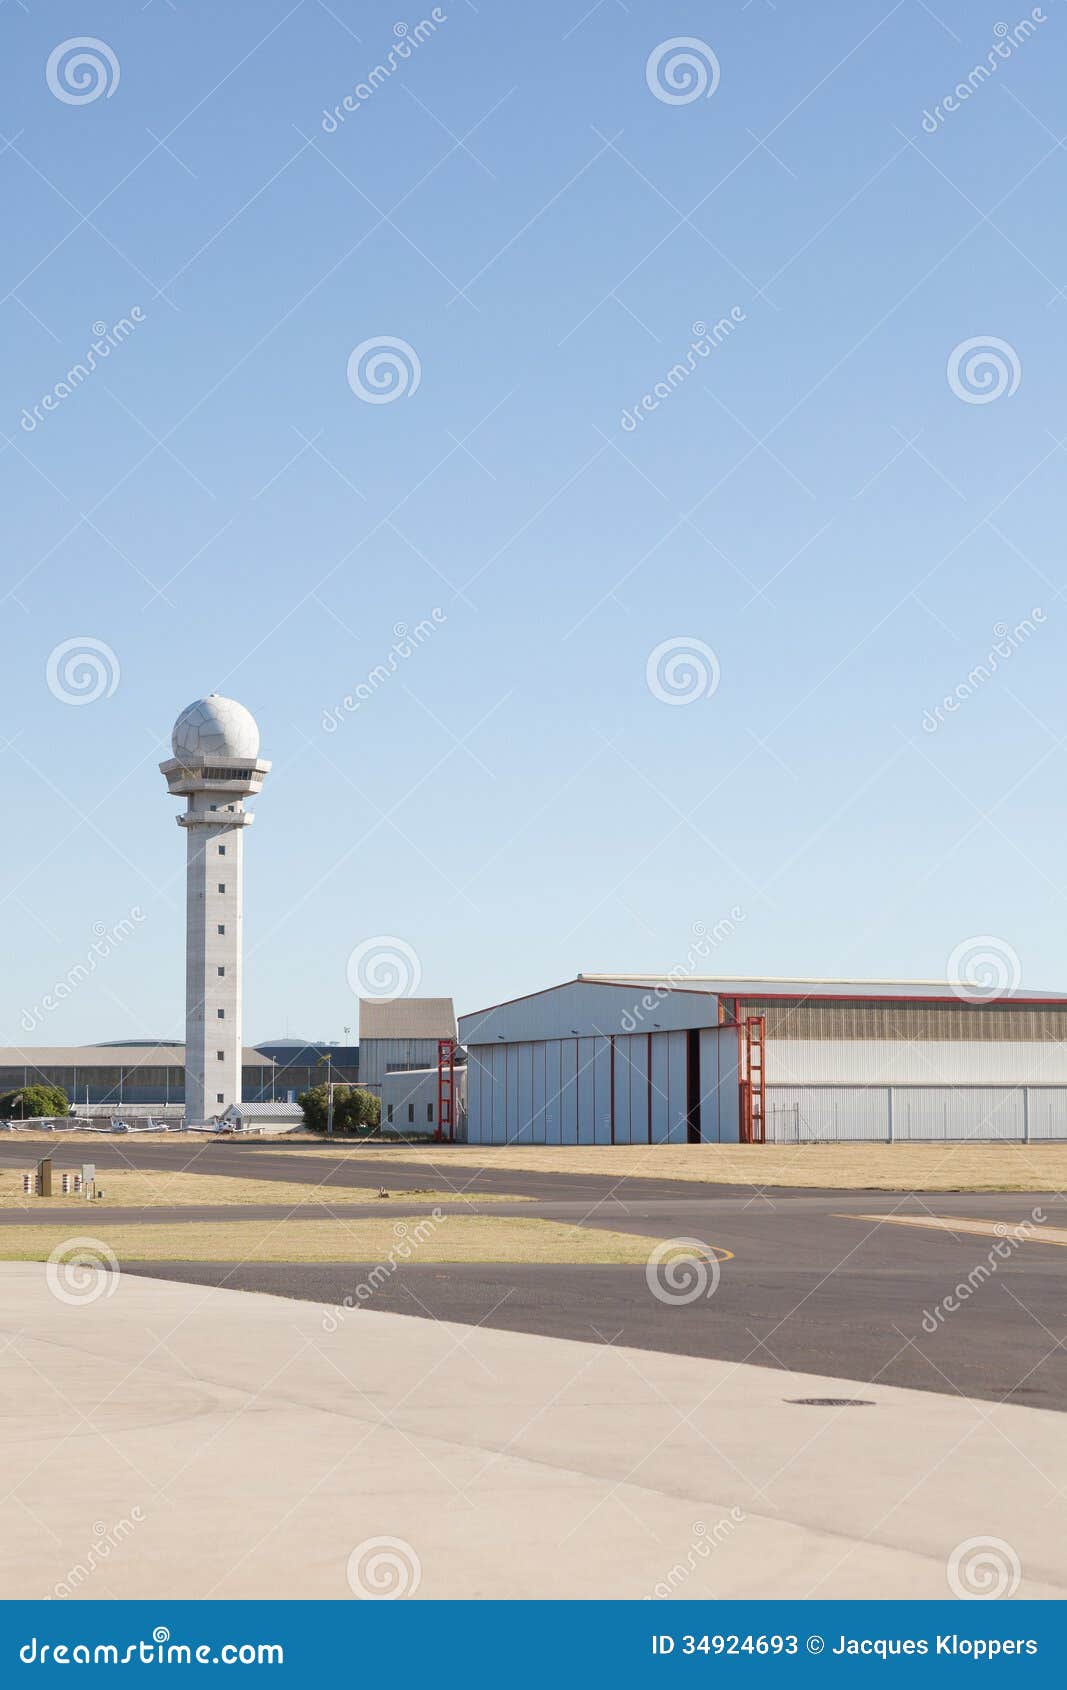 generic airfield with hangar and control tower